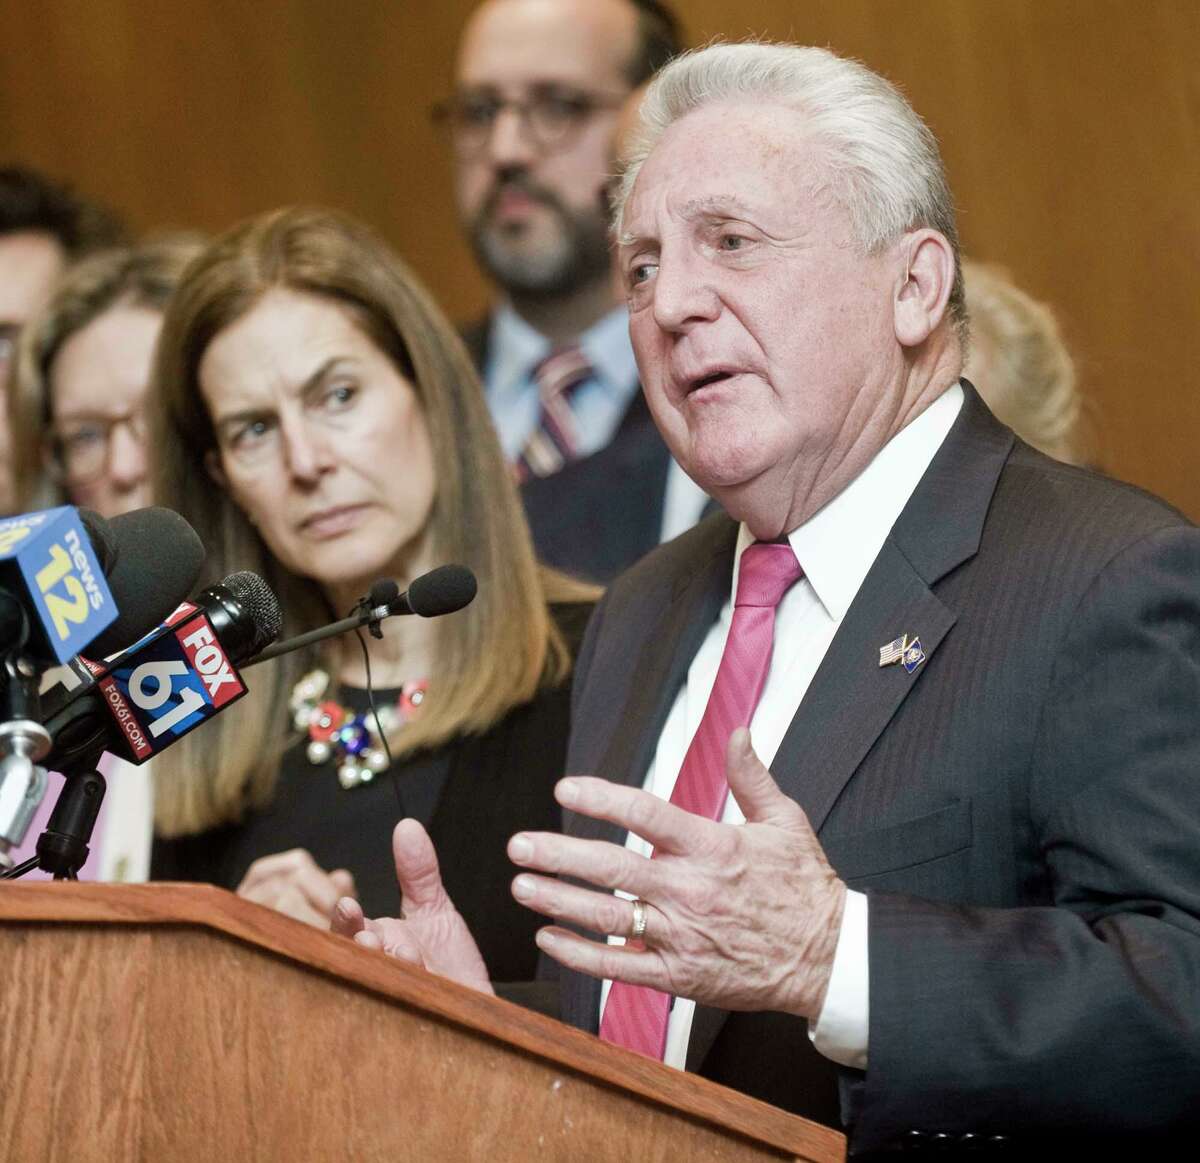 Norwalk Mayor Harry Rilling speaks at a news conference at Danbury City Hall regarding an employee from Danbury Hospital and Norwalk Hospital who is a resident of New York State and has tested positive for coronavirus disease (COVID-19). Friday, March 6, 2020